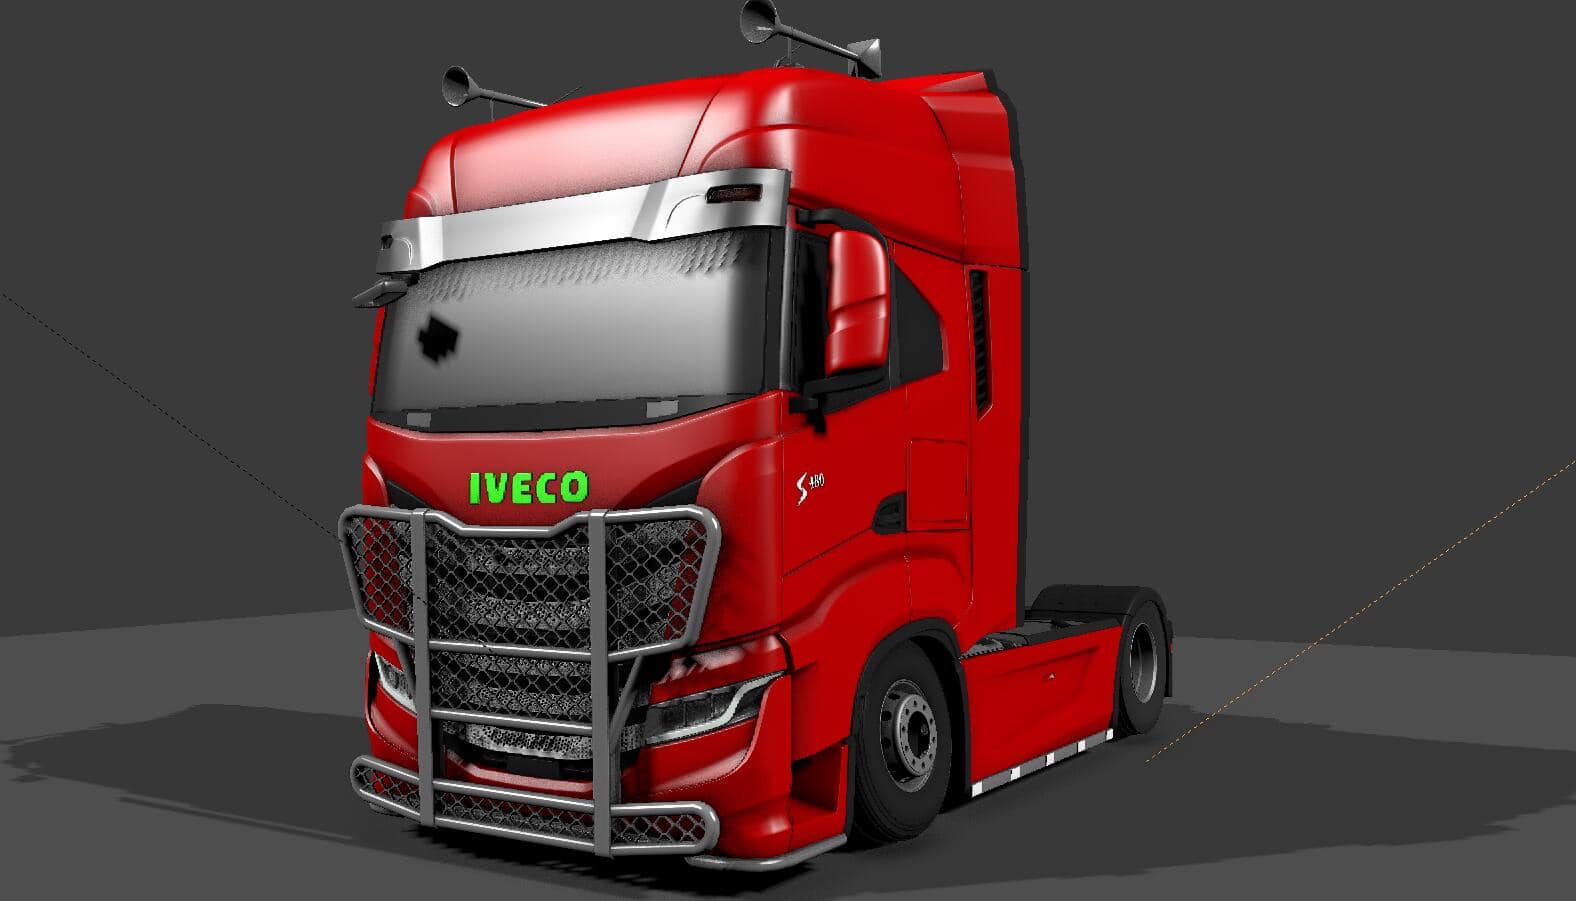 Iveco S-way realistic exterior and interior. V2.0 | ETS2 ...